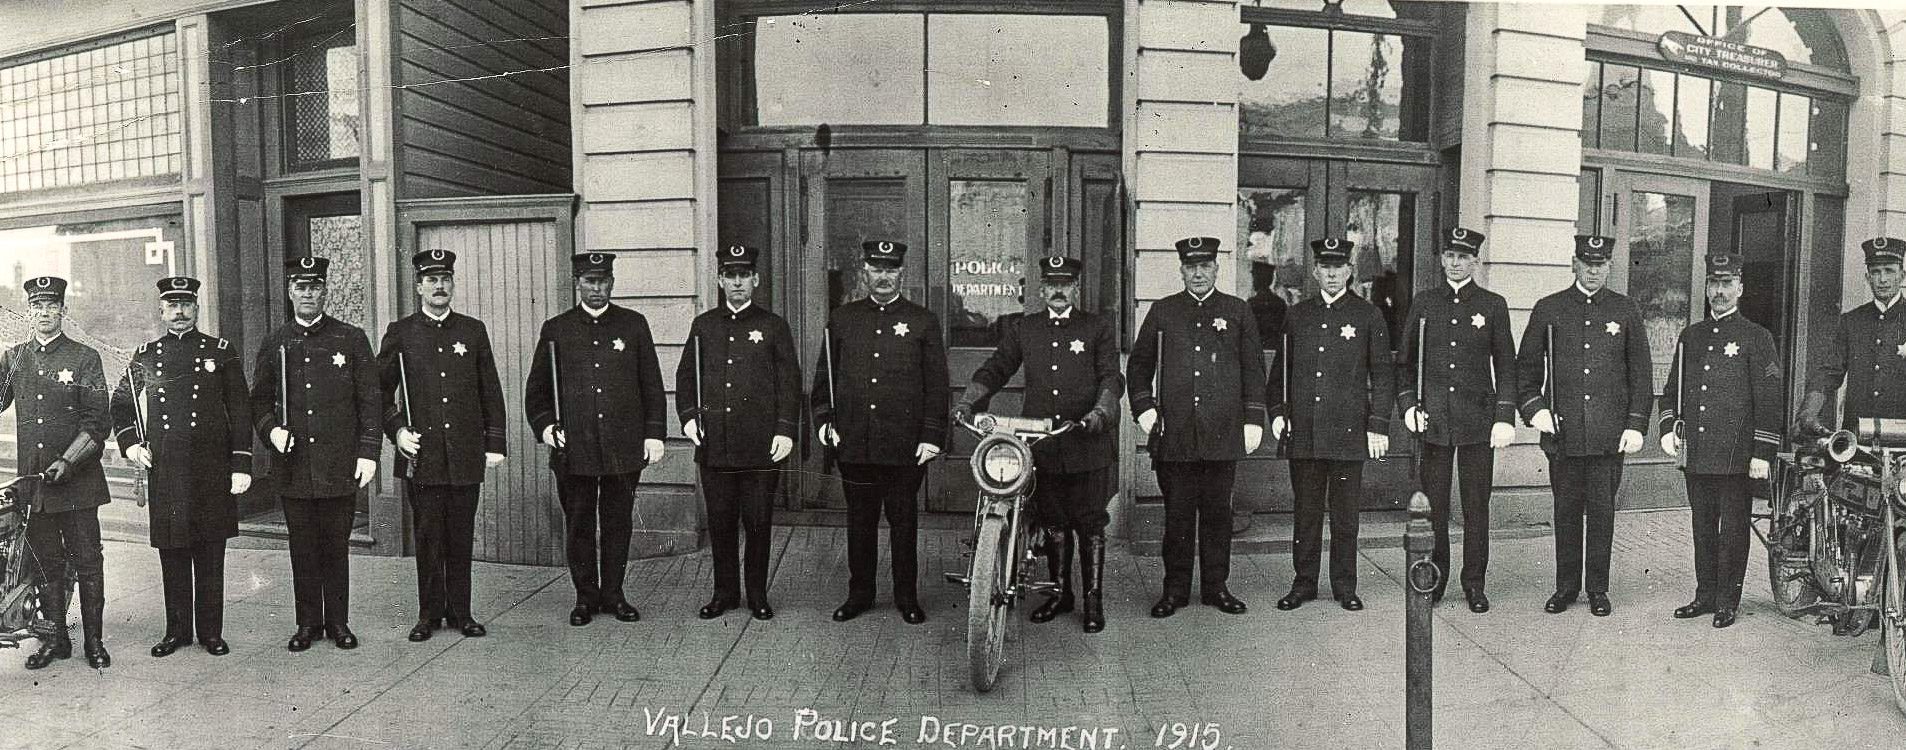 Members of the Vallejo Police Department stand in front of their headquarters in a photograph dated 1915.